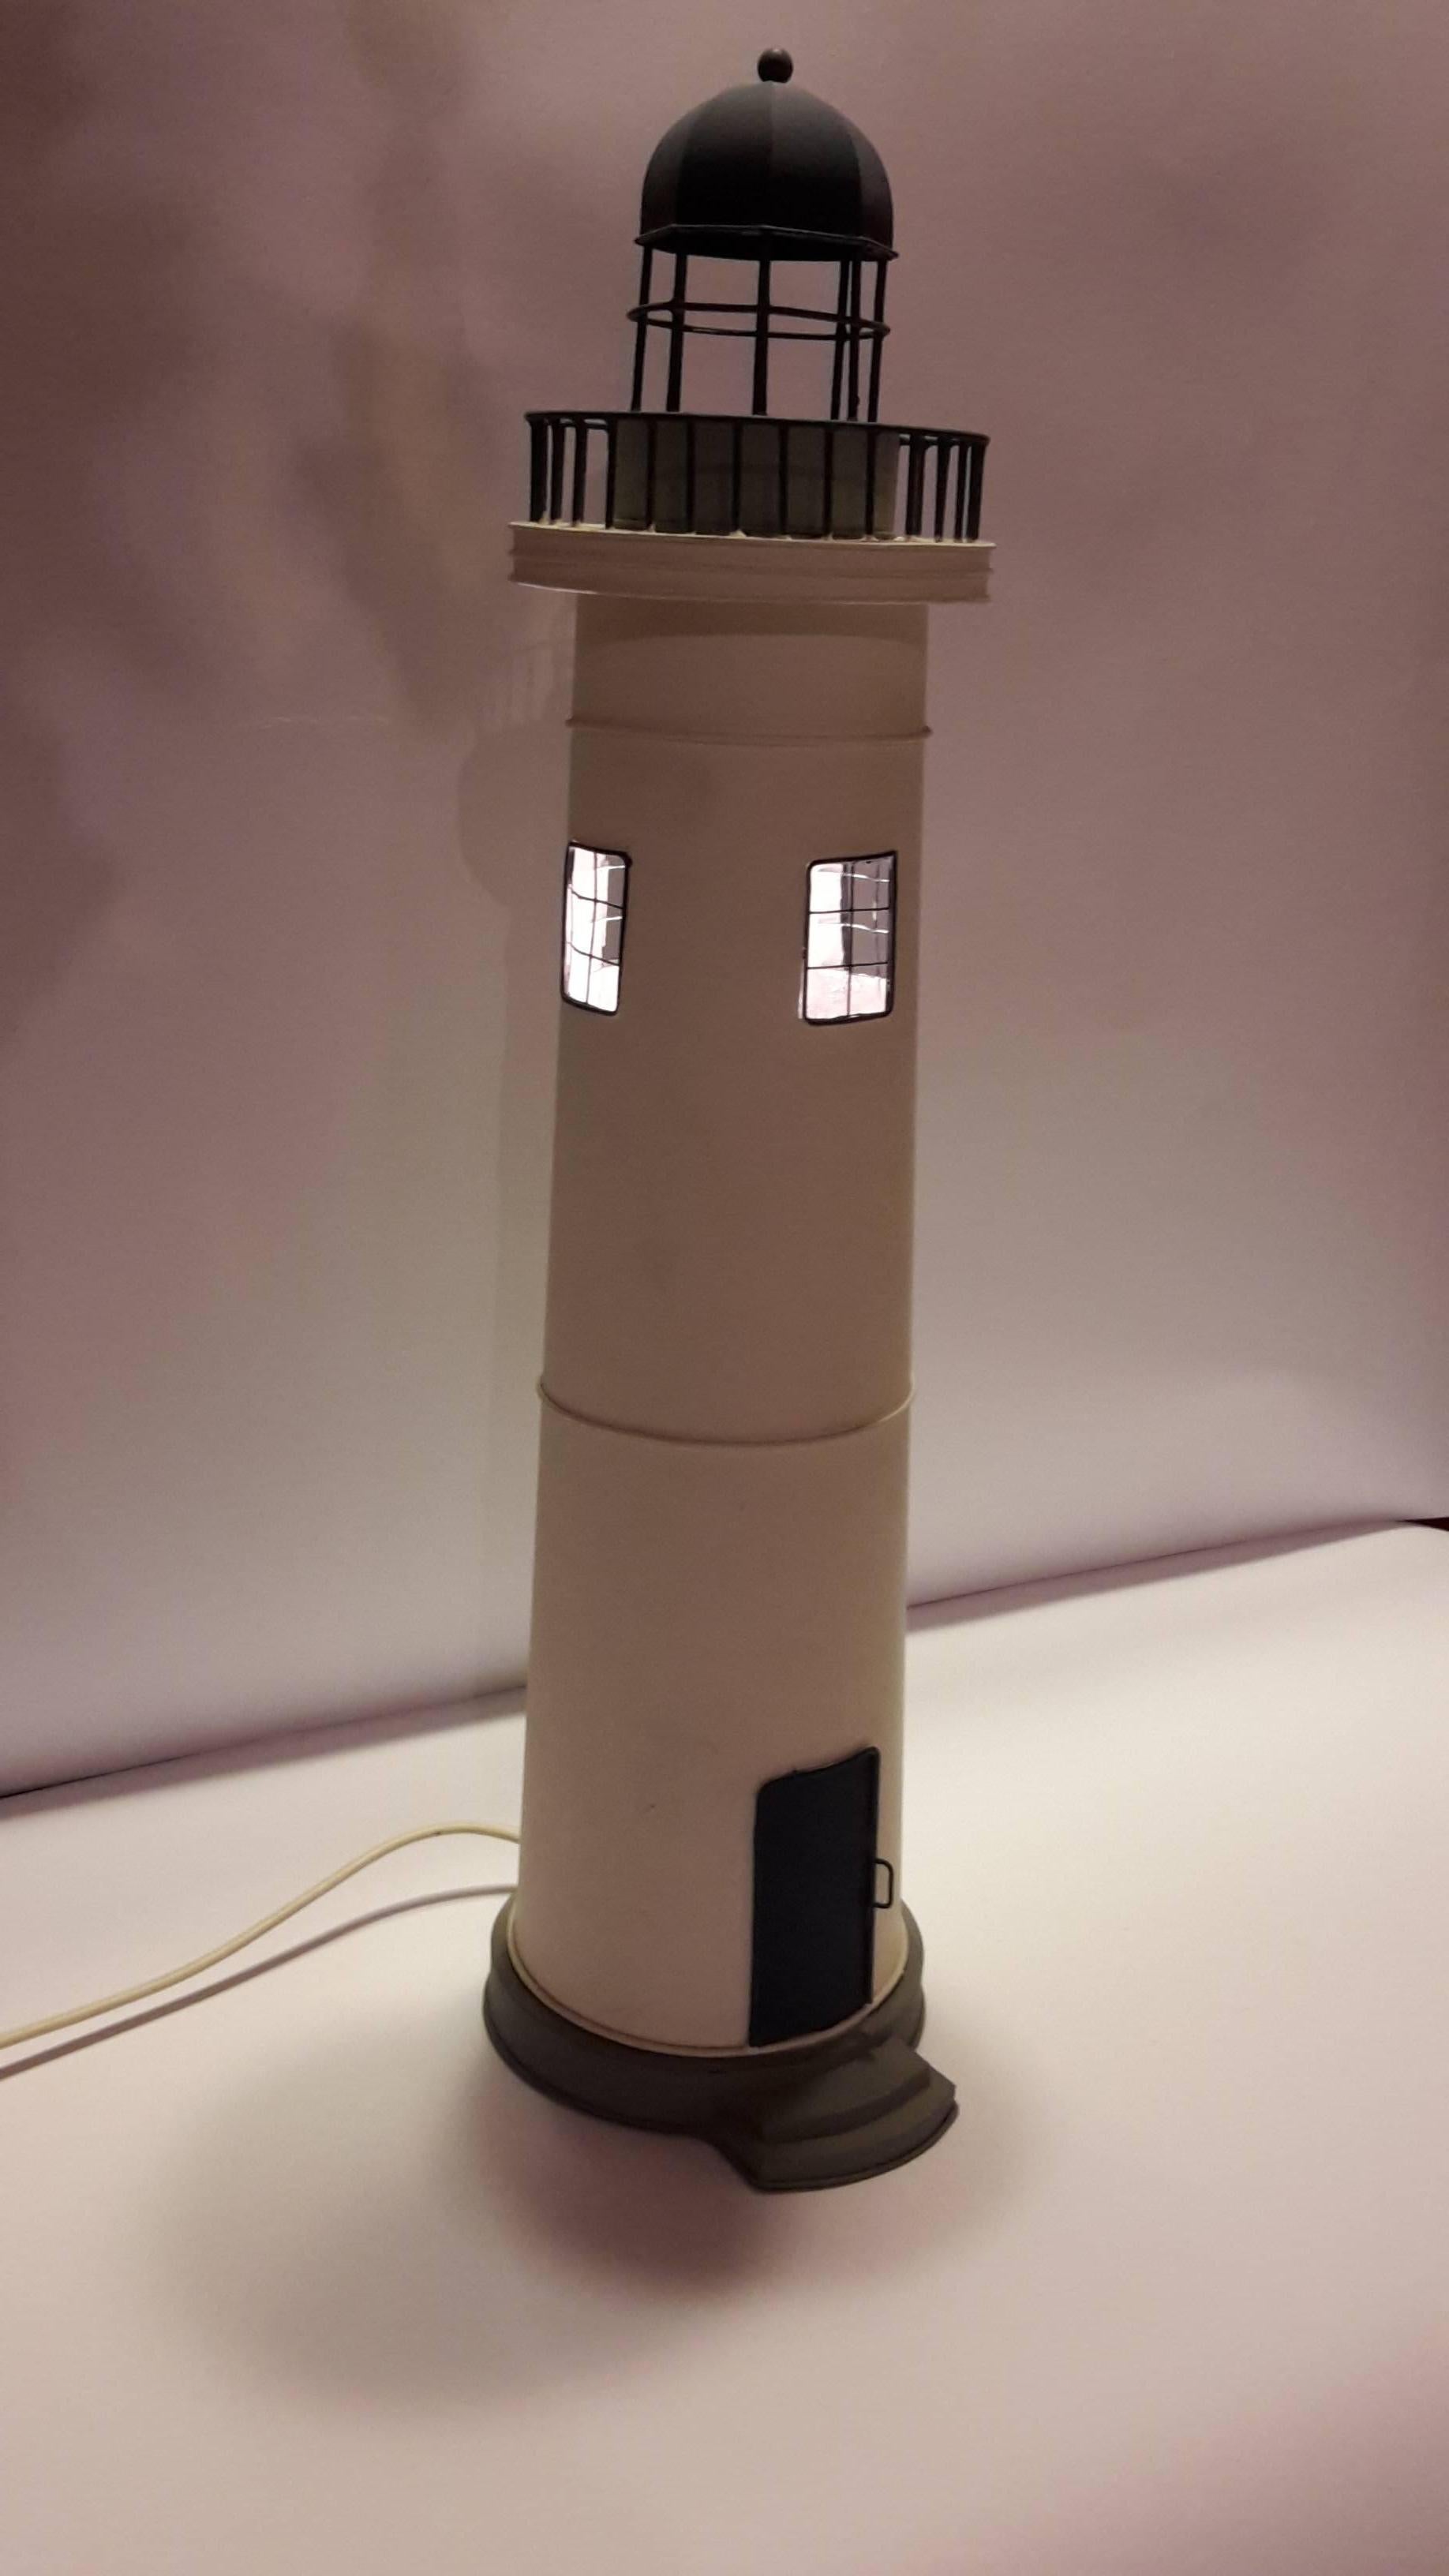 Plastic Table Lamp in Lighthouse Shape For Sale